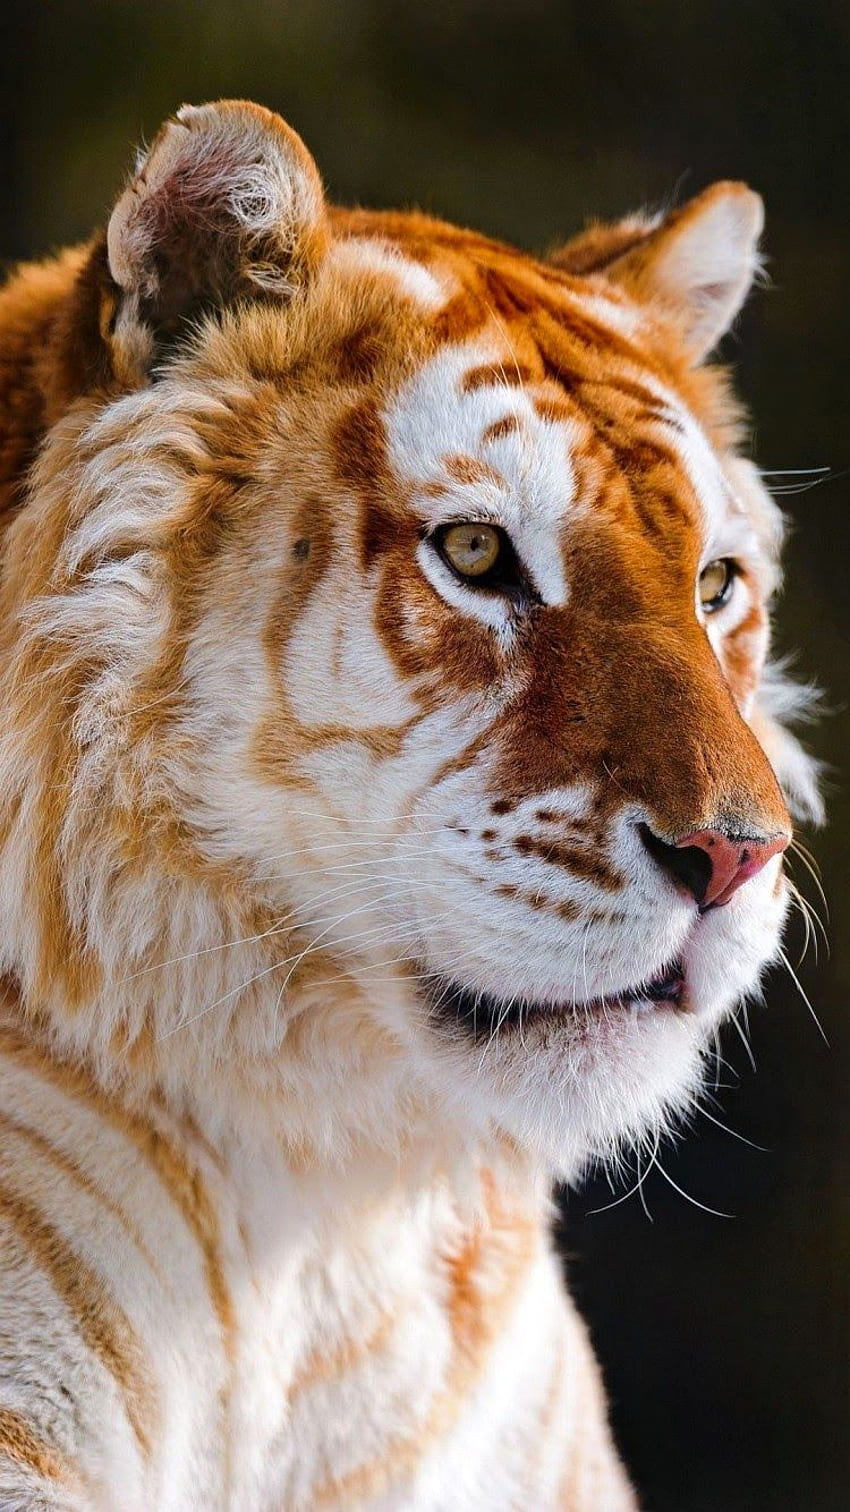 Majestic Tiger Wallpaper for Phone